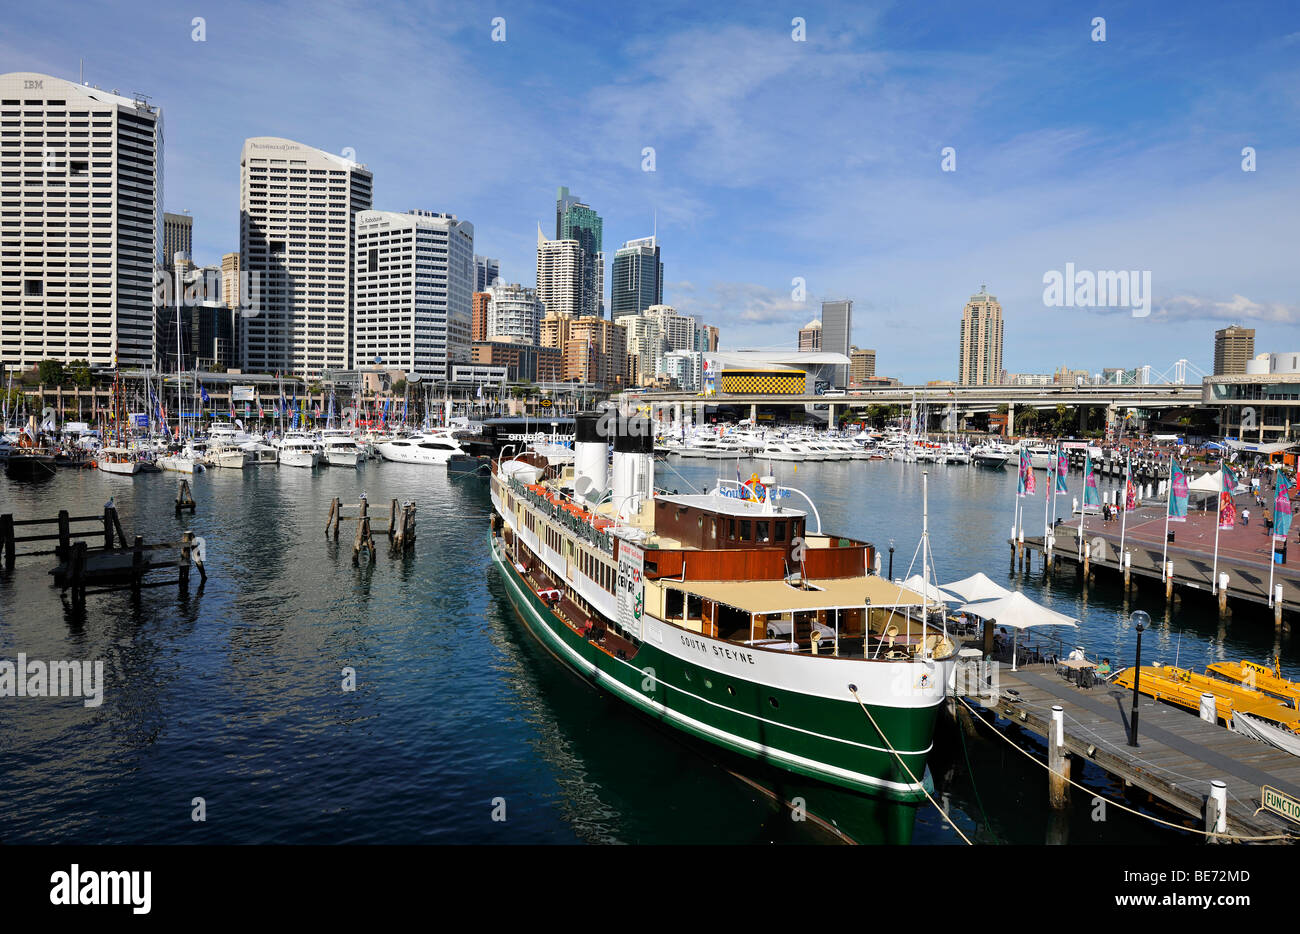 Darling Harbour, skyline of the Central Business District, Sydney, New South Wales, Australia Stock Photo